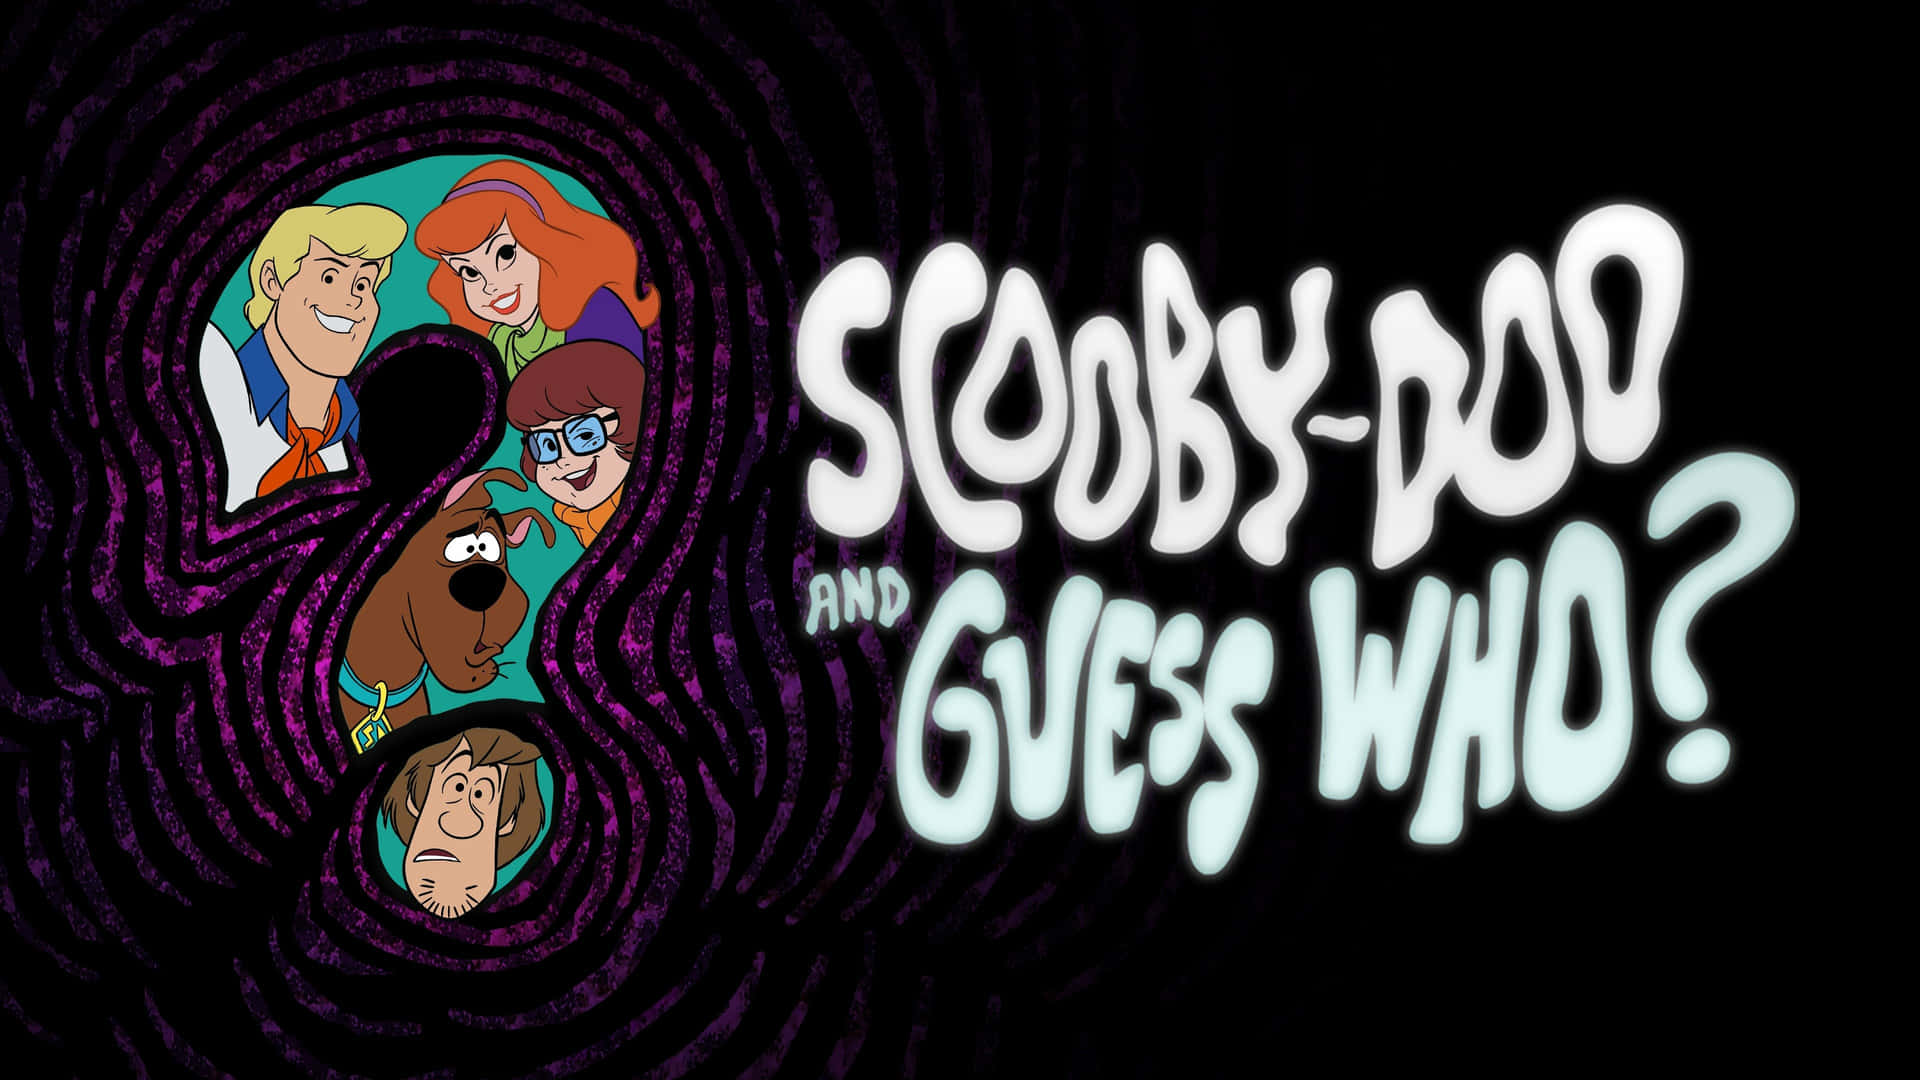 Scooby Doo is solving a mystery on the beach!